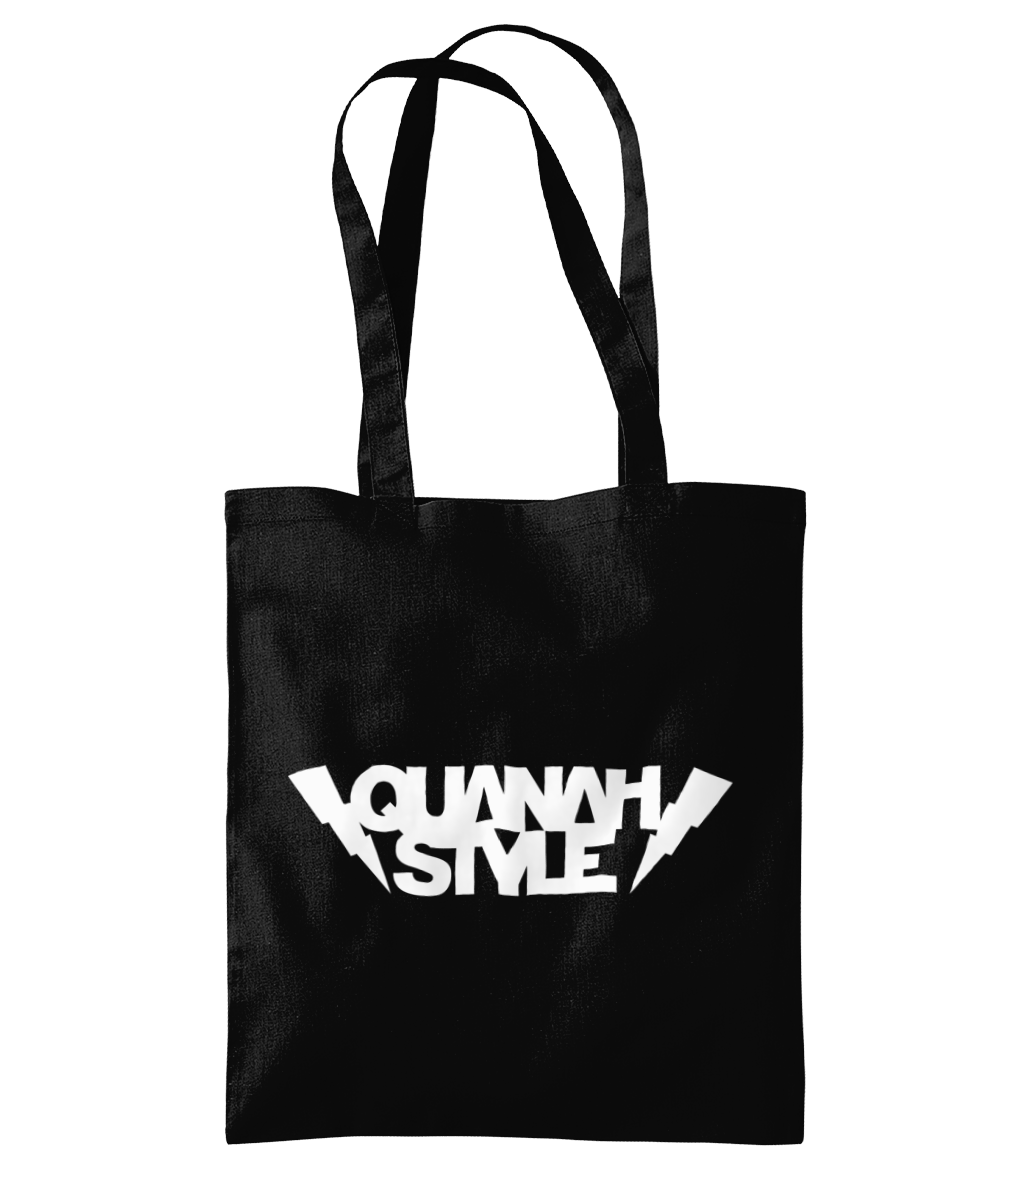 Quanah Style - White Logo Tote Bag - SNATCHED MERCH